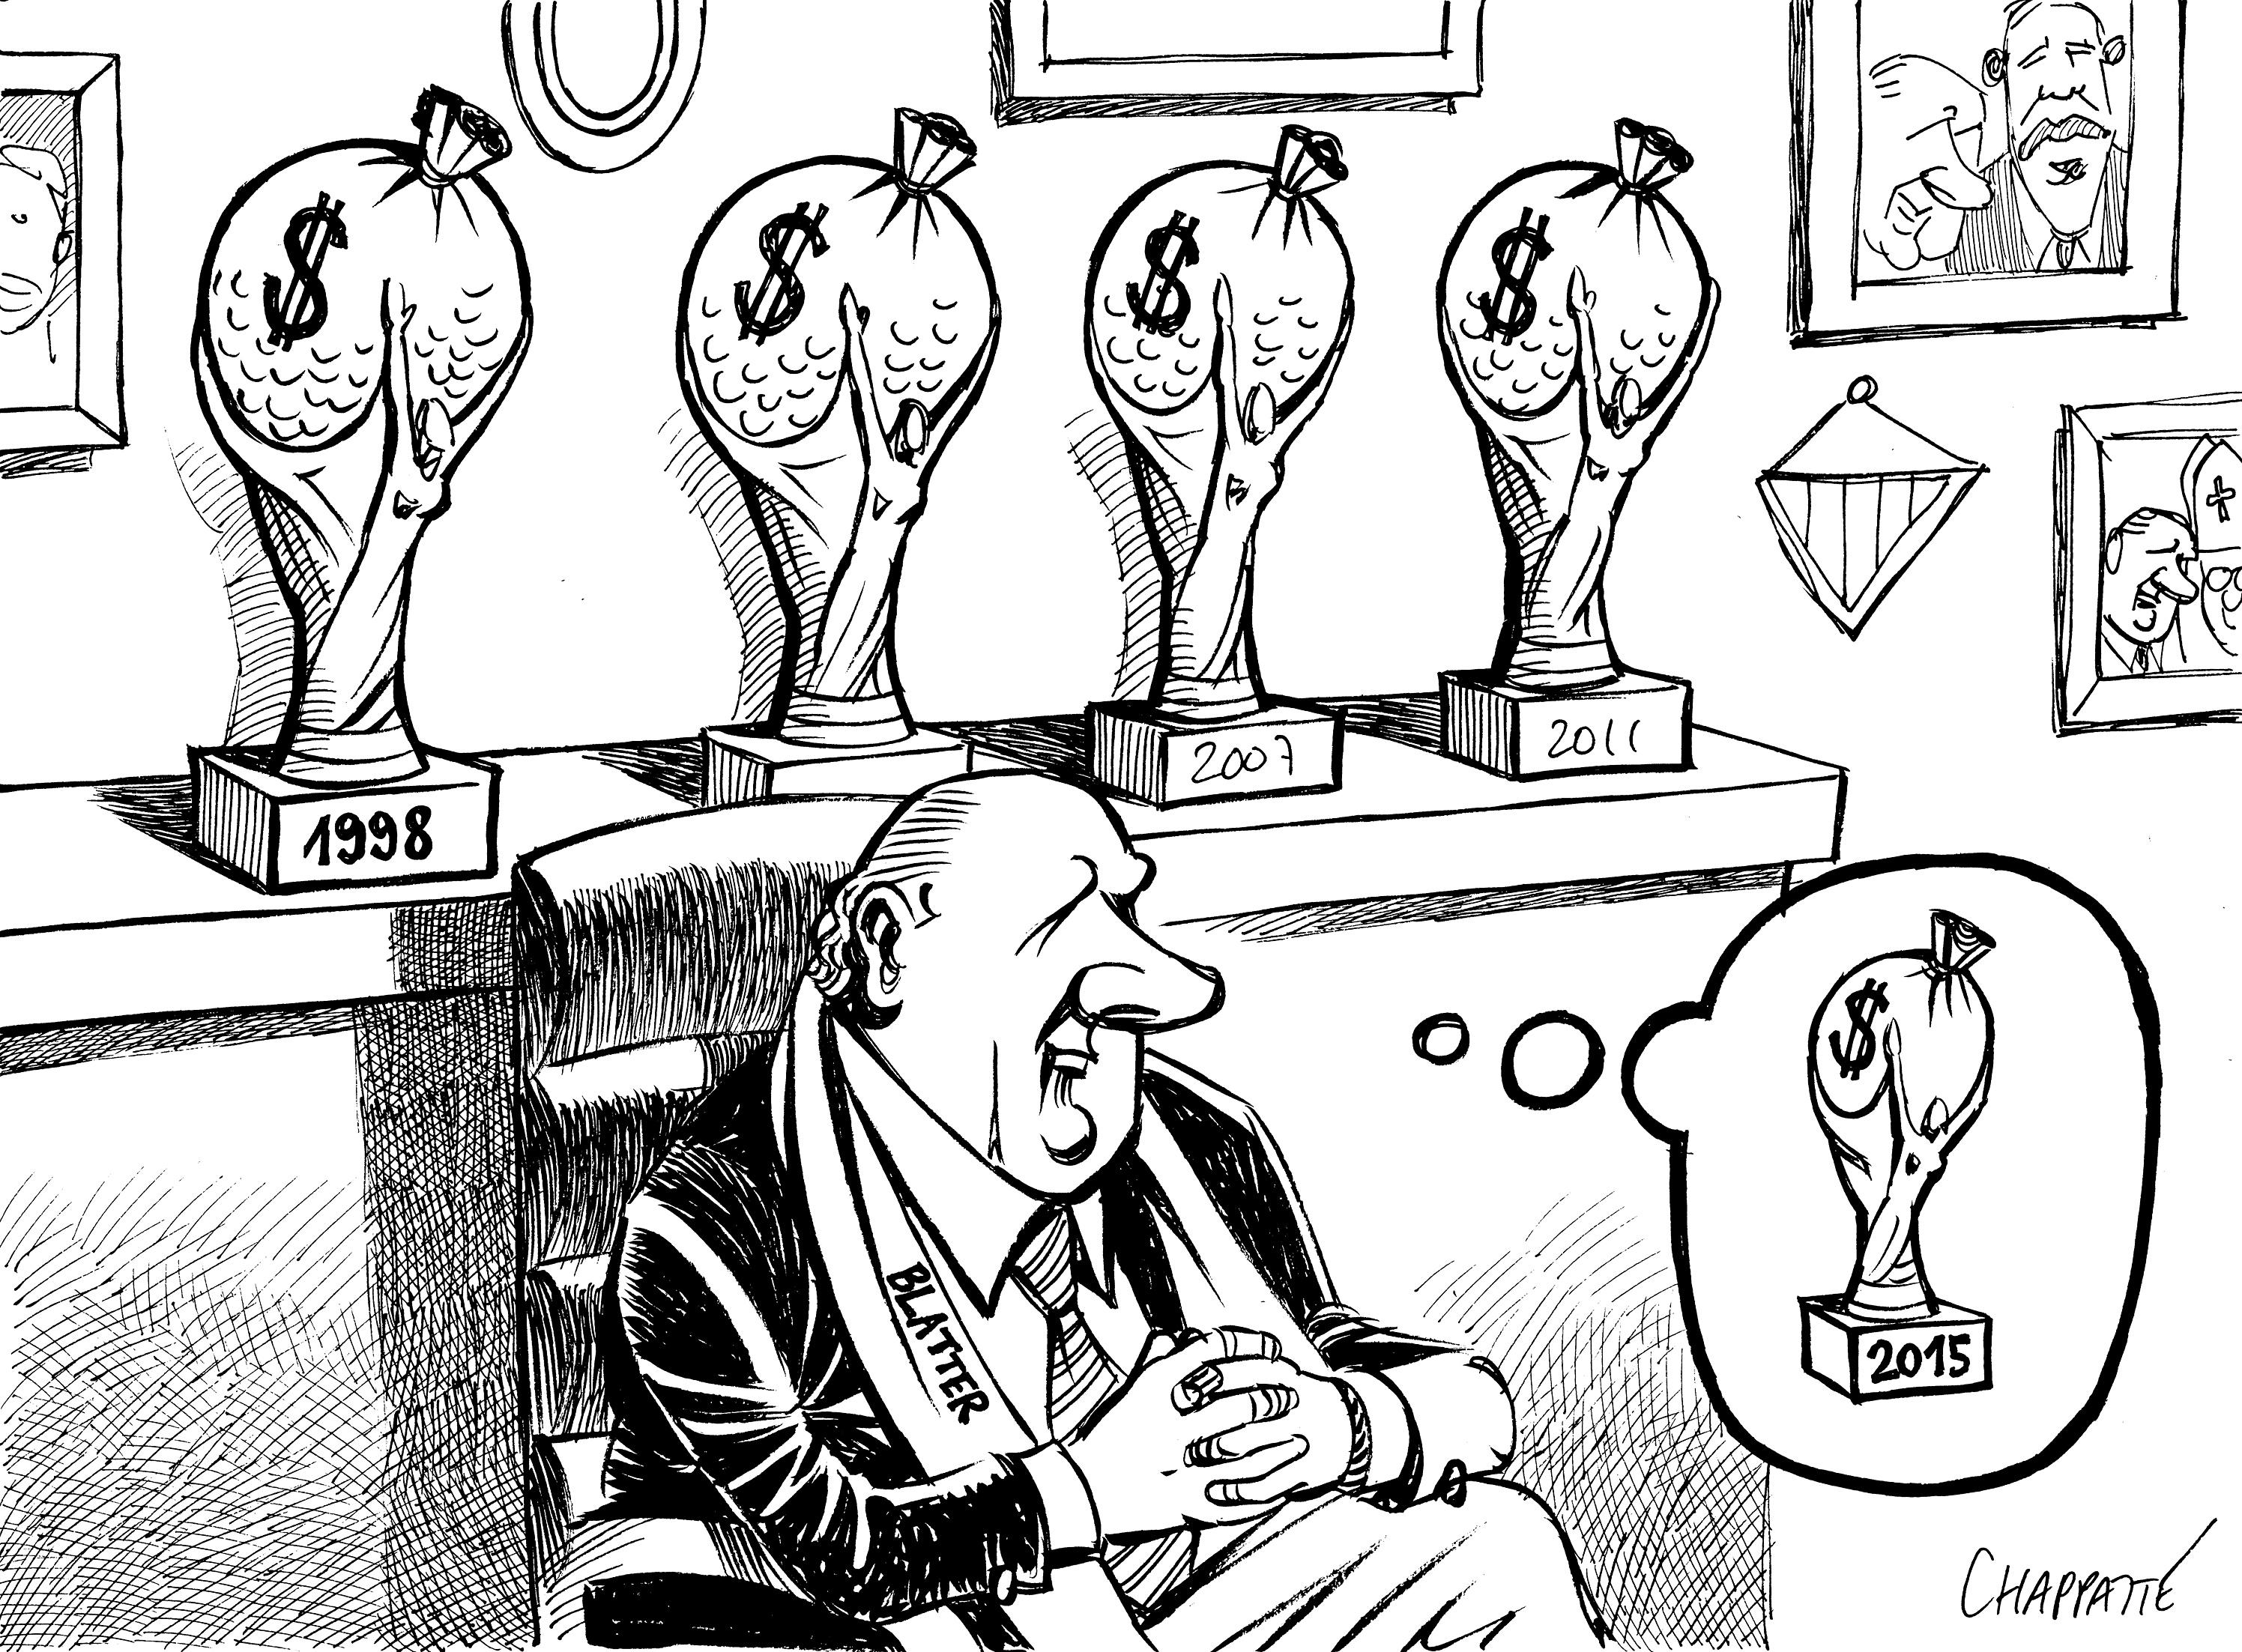 One more FIFA term for Blatter?